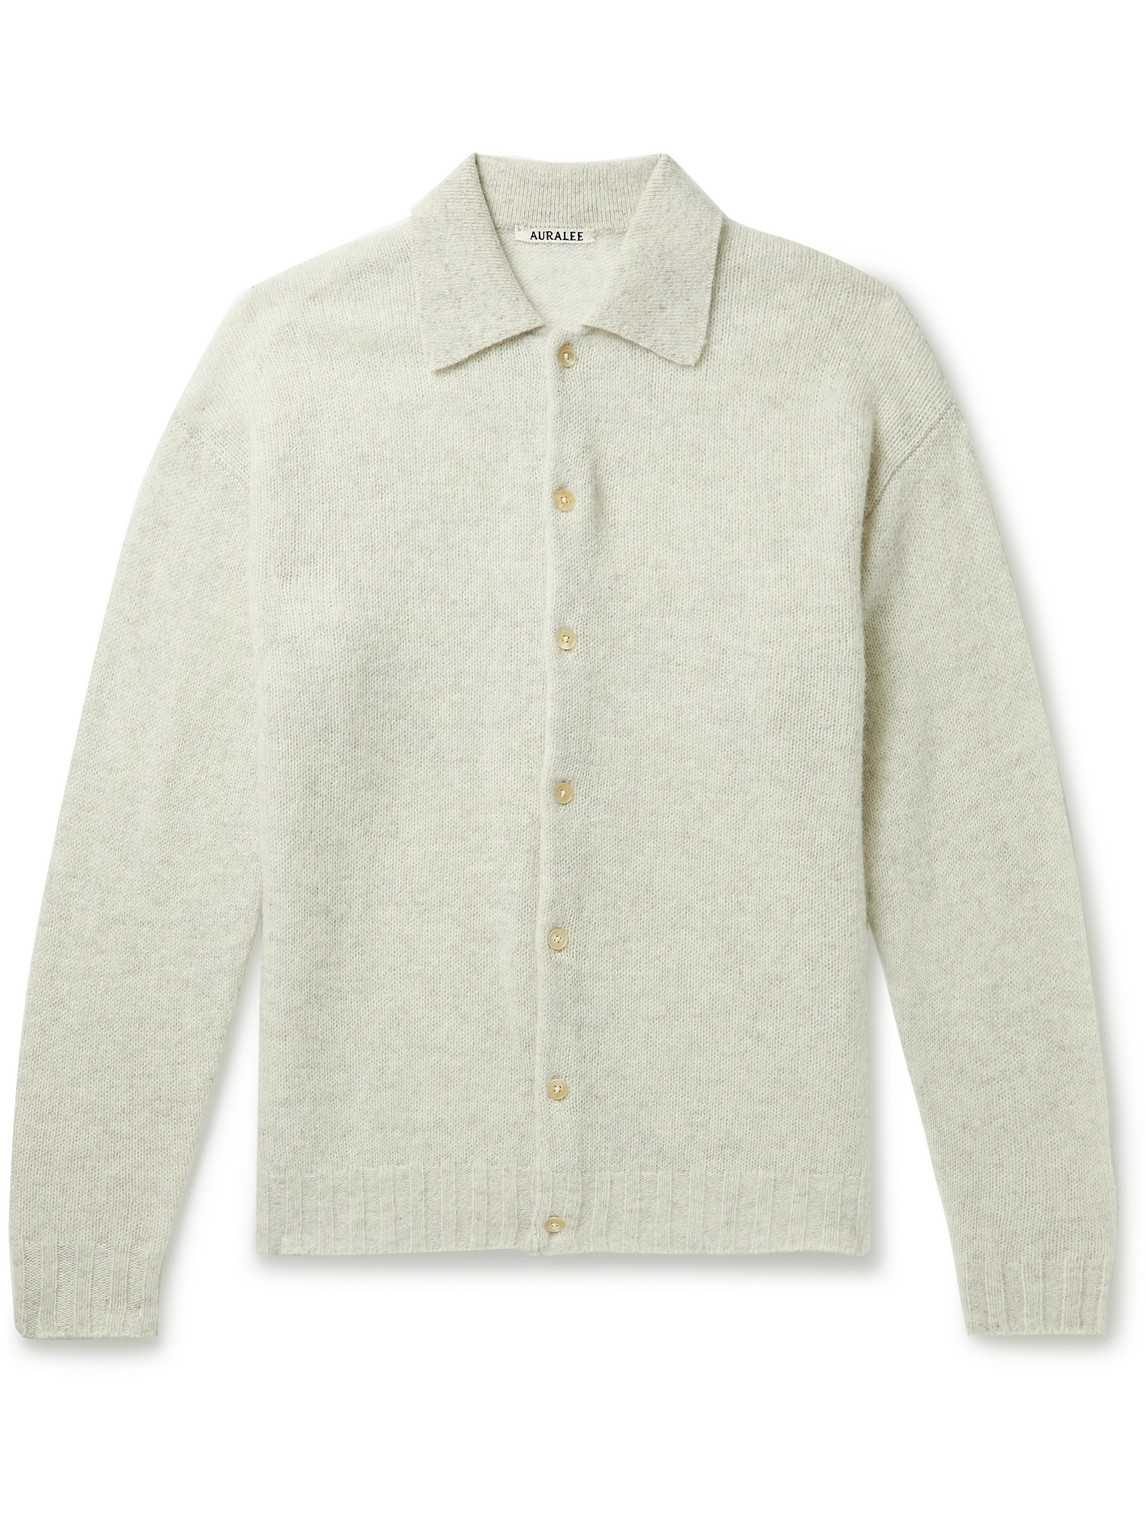 Auralee Wool and Cashmere-Blend Cardigan